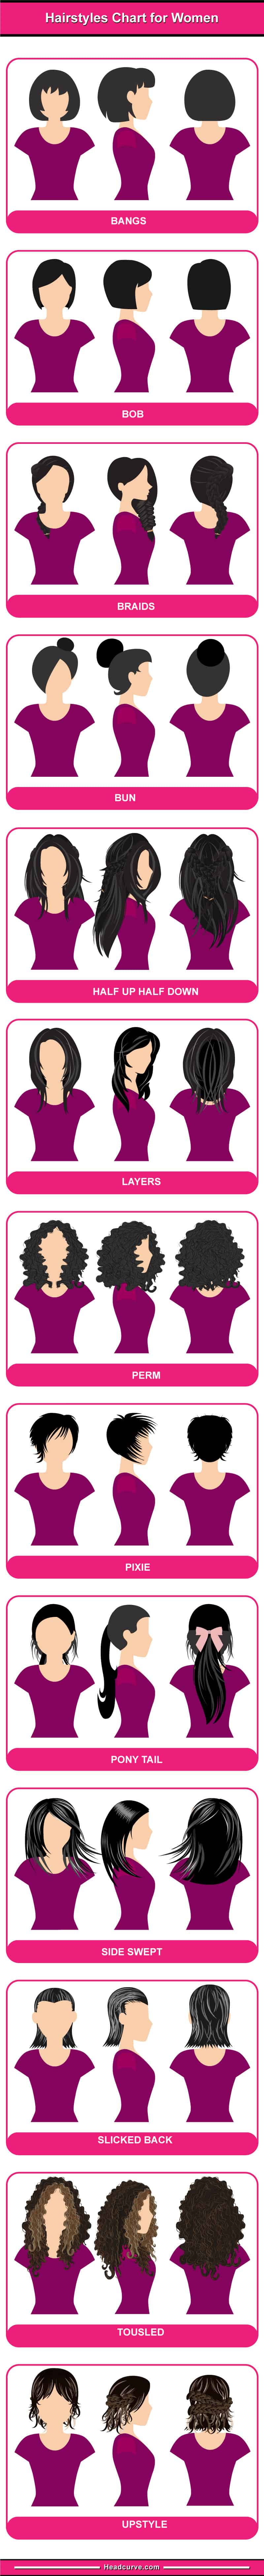 Women's hairstyles chart with diagrams